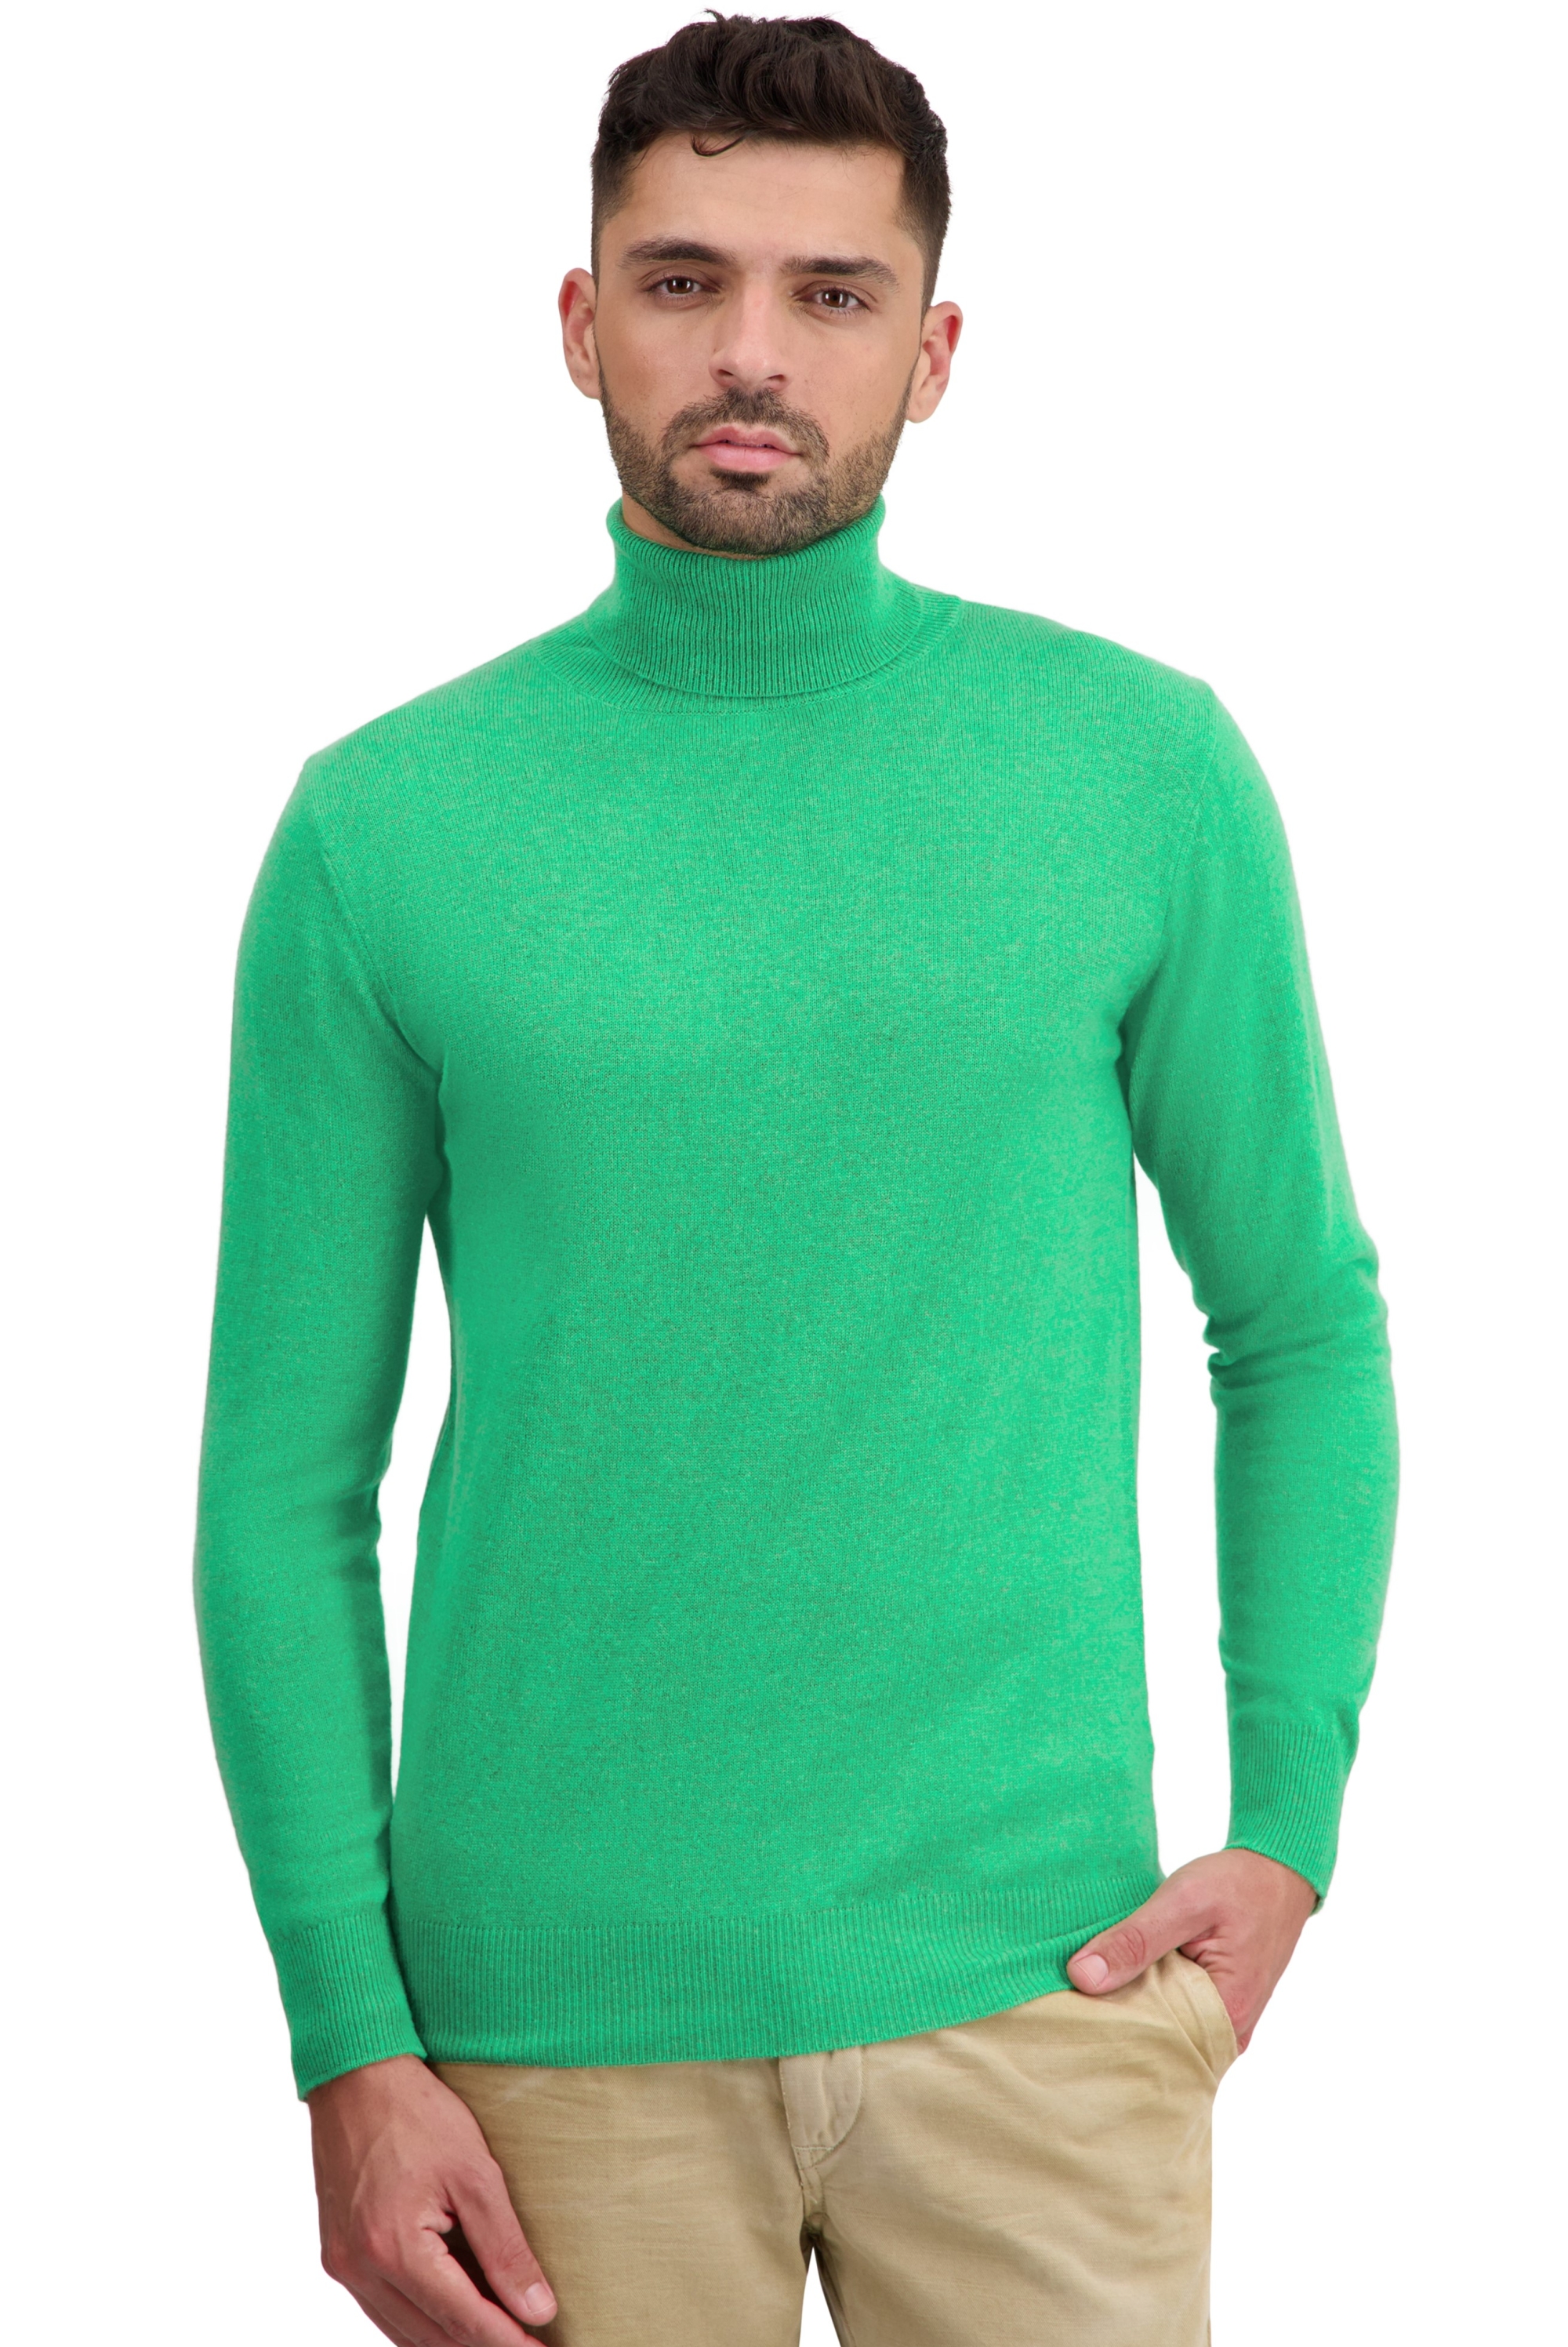 Cashmere men basic sweaters at low prices tarry first midori xl